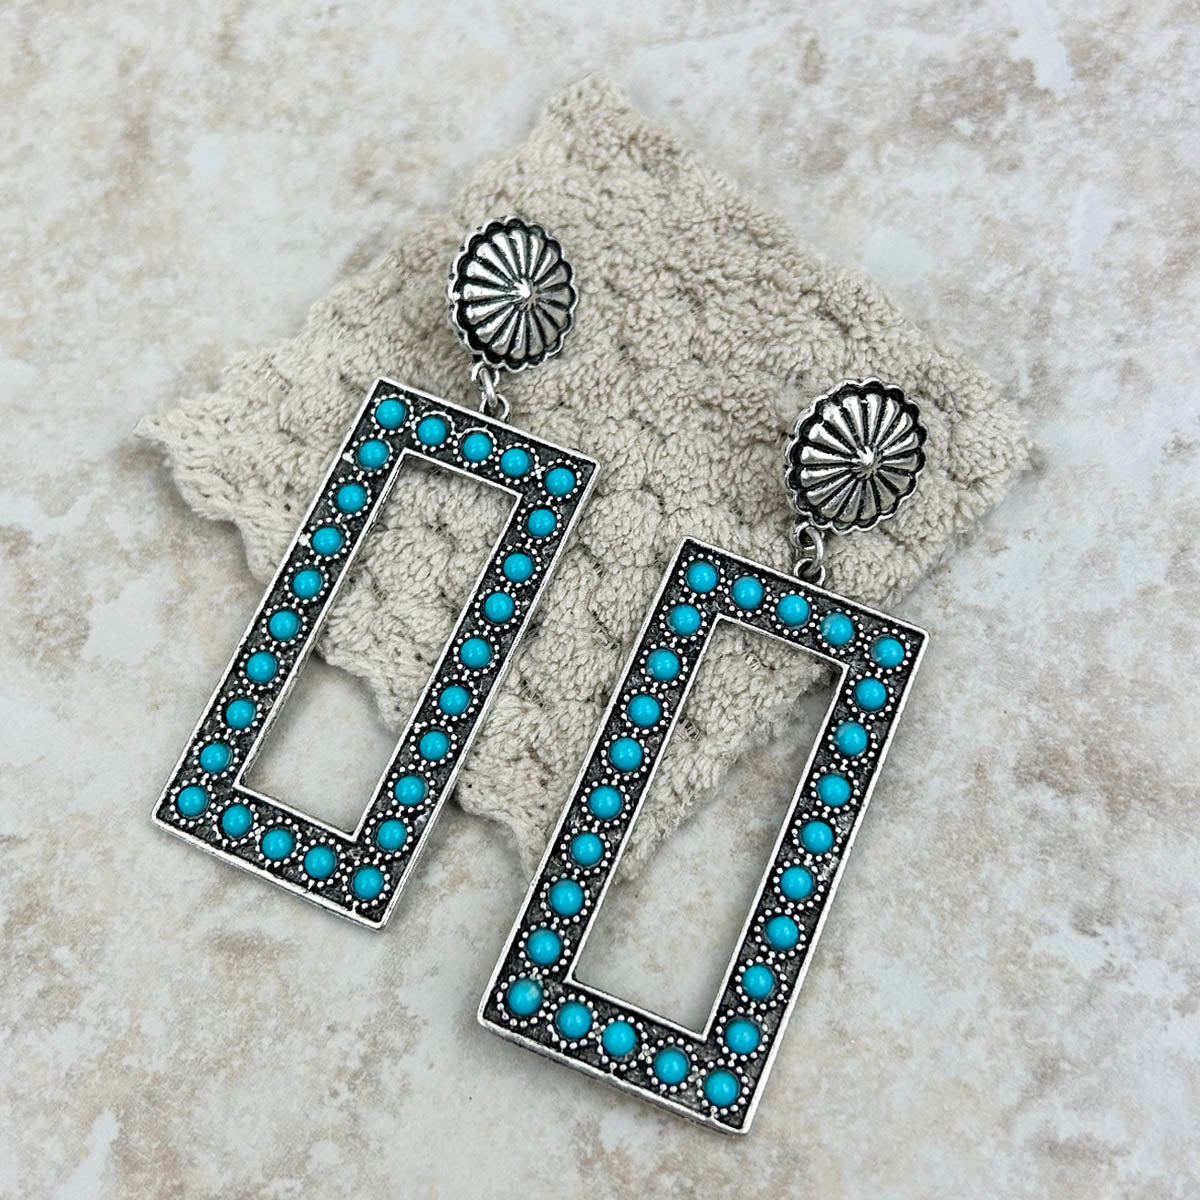 Small Silver Concho With Blue Turquoise Stones Large Triangle Earring